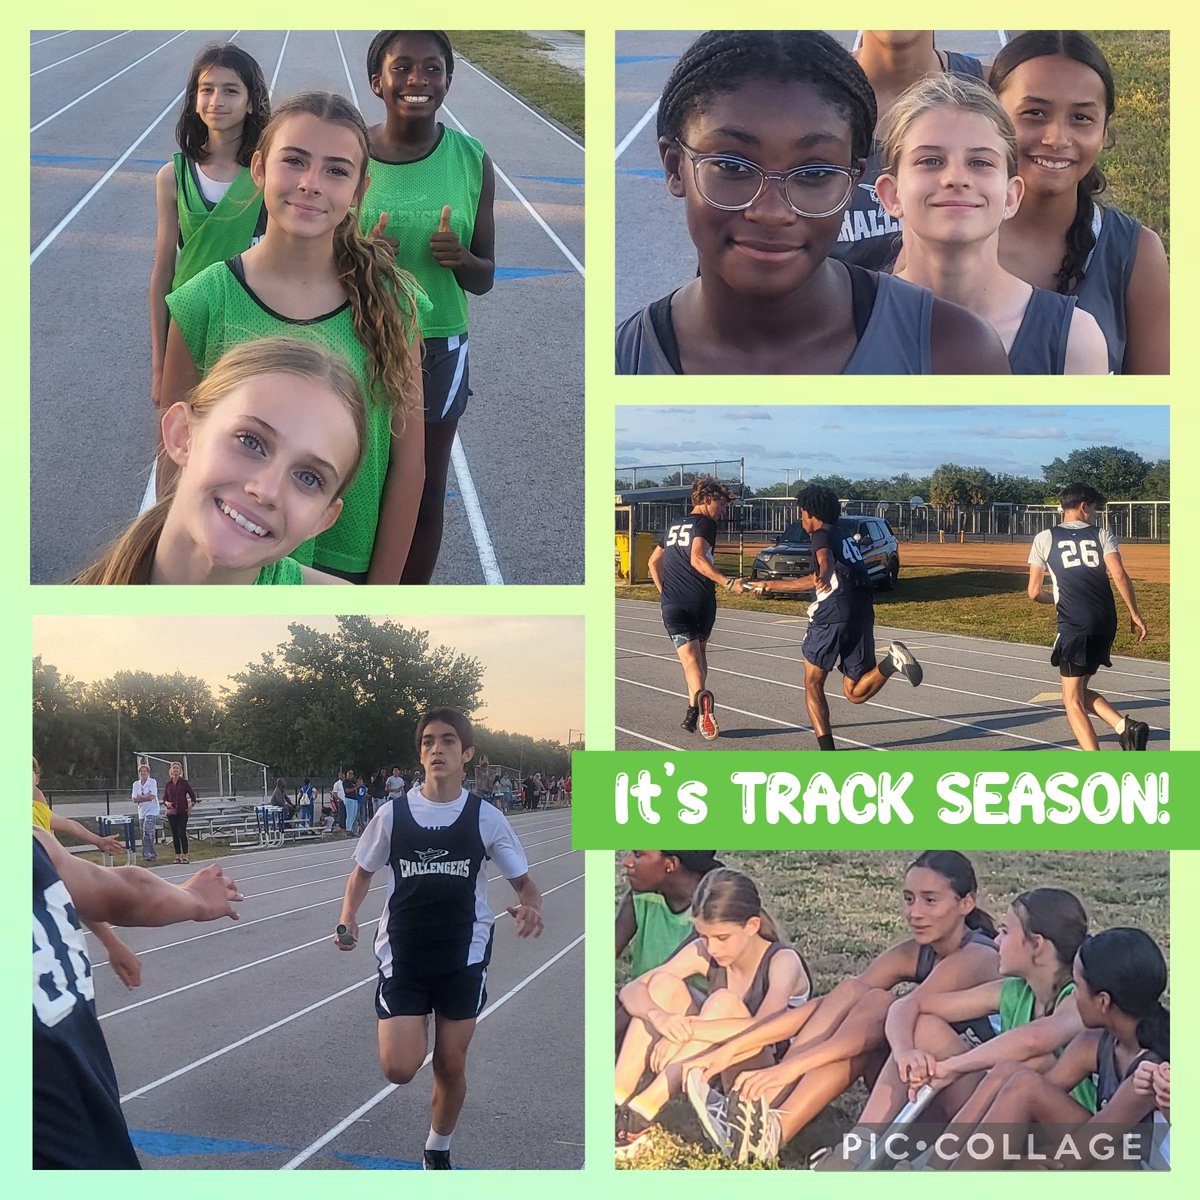 First track meet of the season at Woodlands. CMMS showed up strong and earned quite a few PRs today. Way to go, Challengers!!! @CMMSPrincipal @CmmsMedia #cmmspe #activekids #track #trackandfield